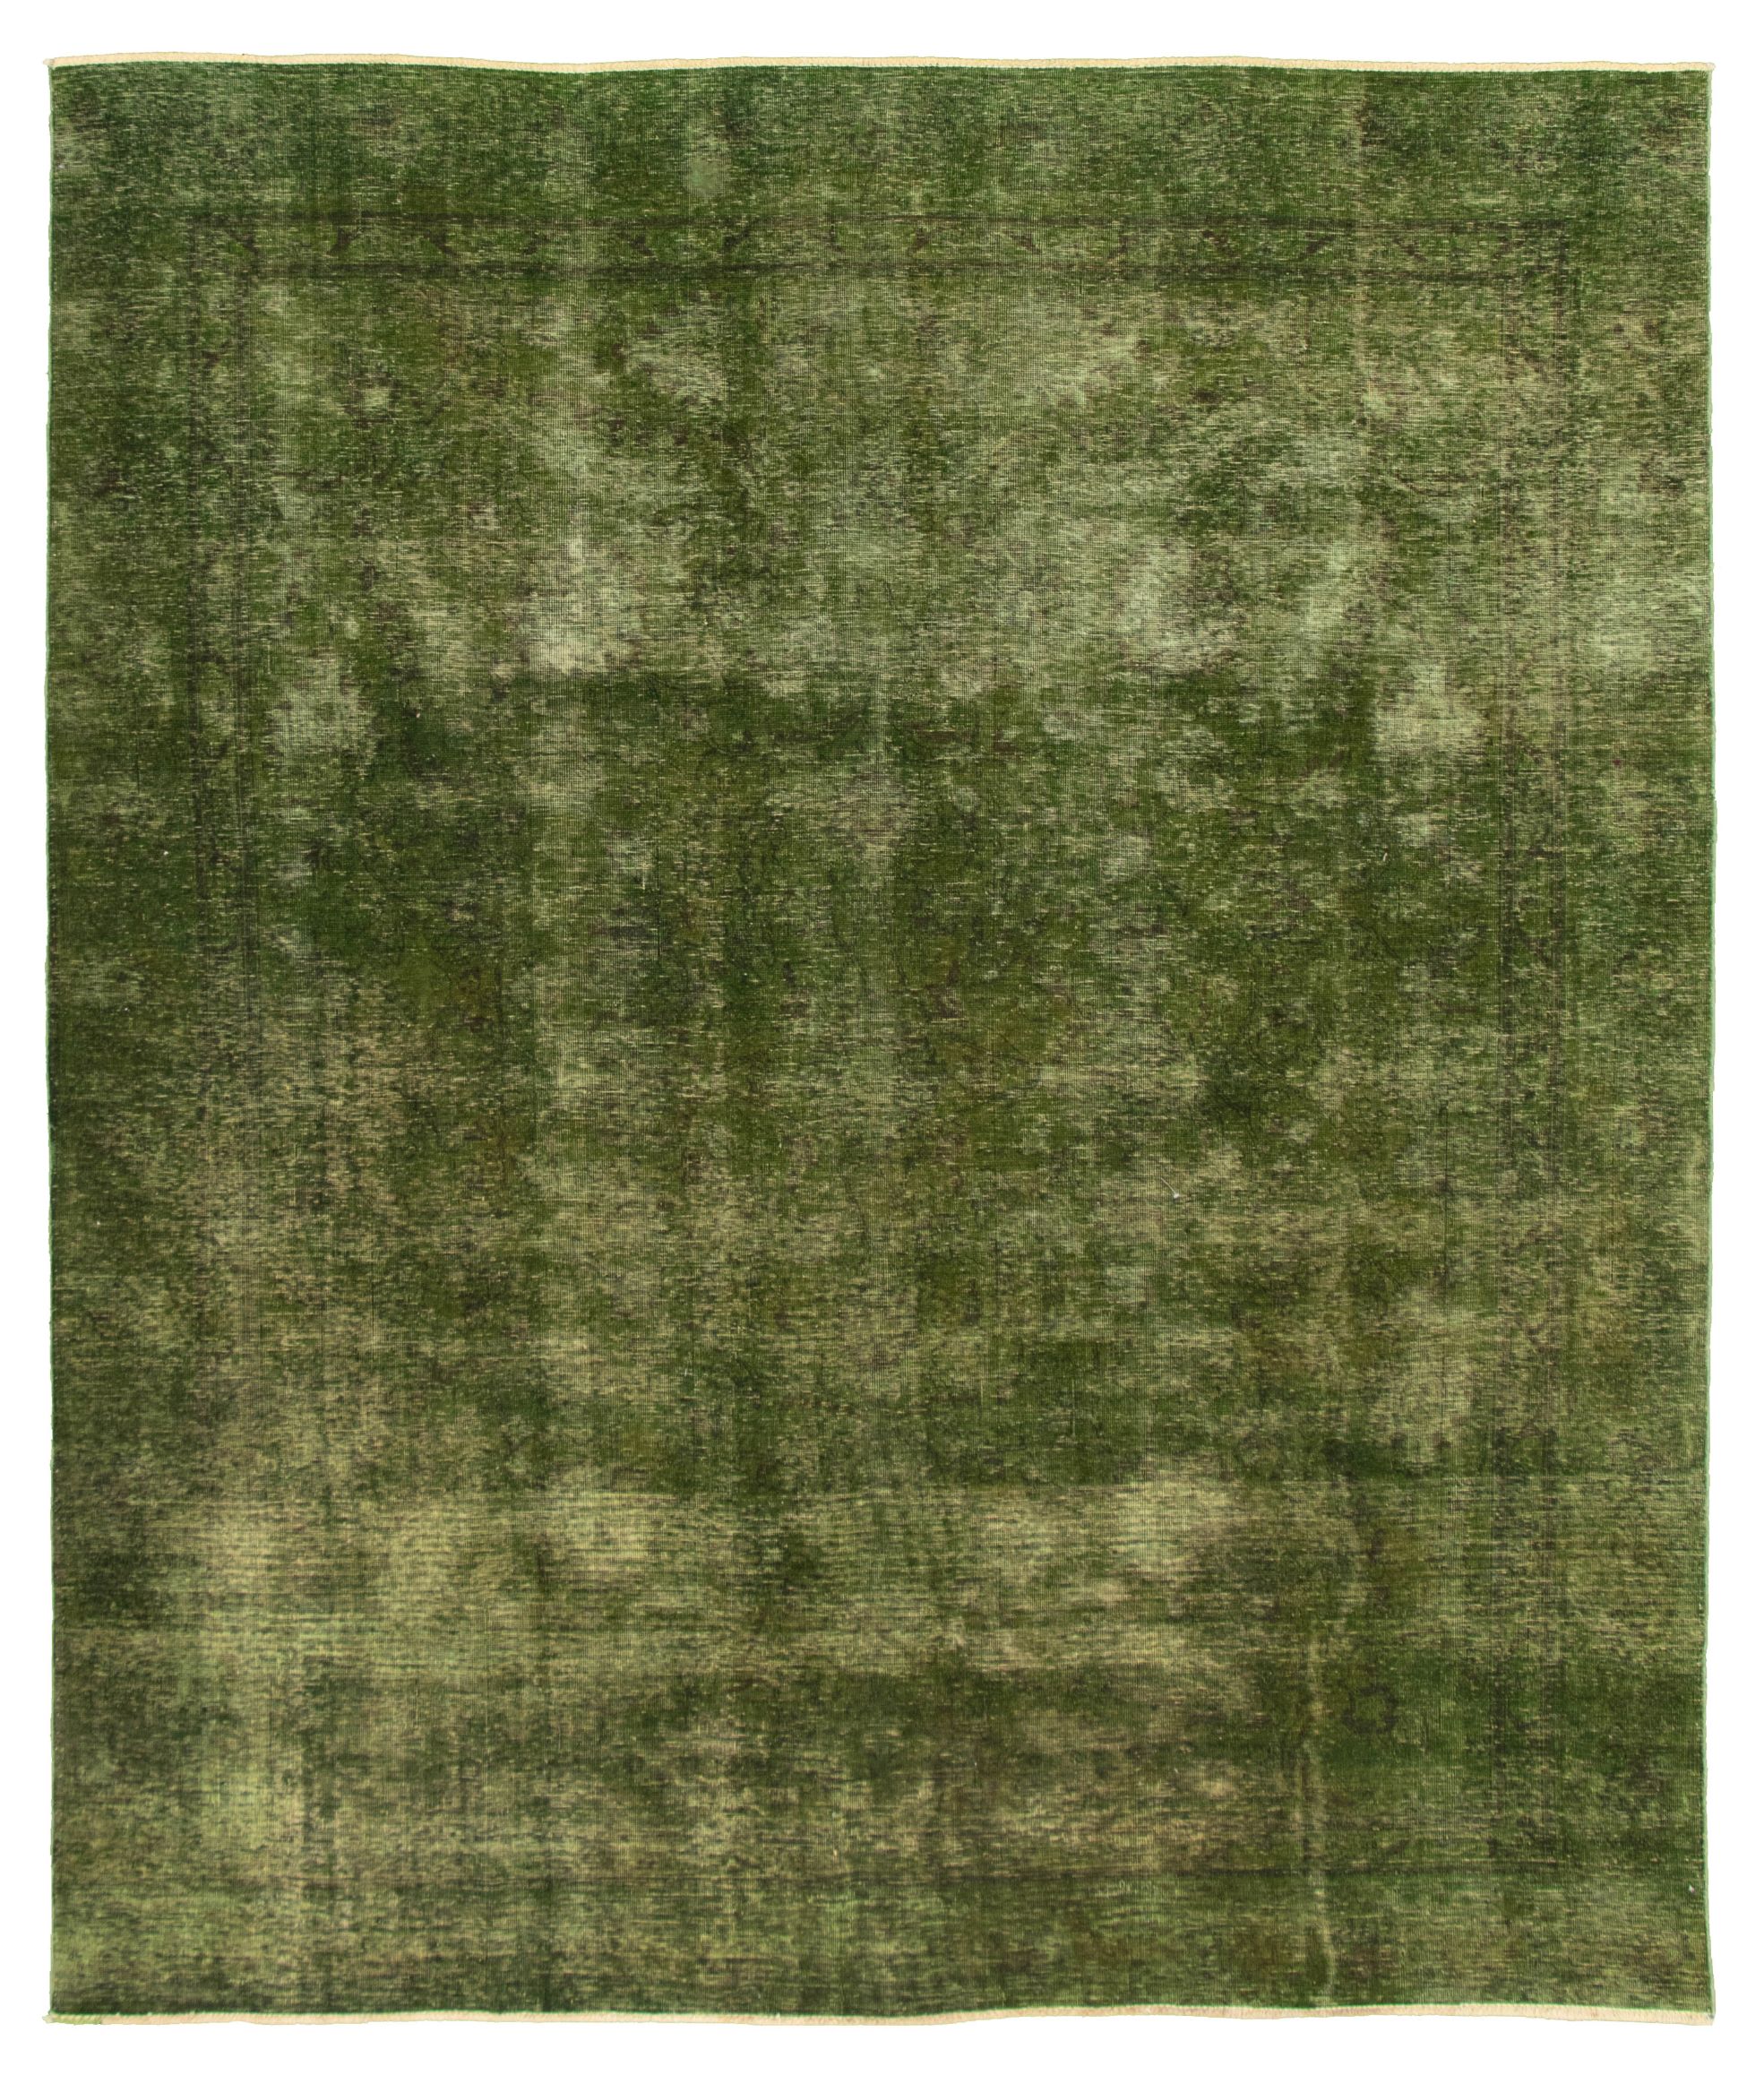 Hand-knotted Color Transition Green Wool Rug 8'10" x 10'5" Size: 8'10" x 10'5"  